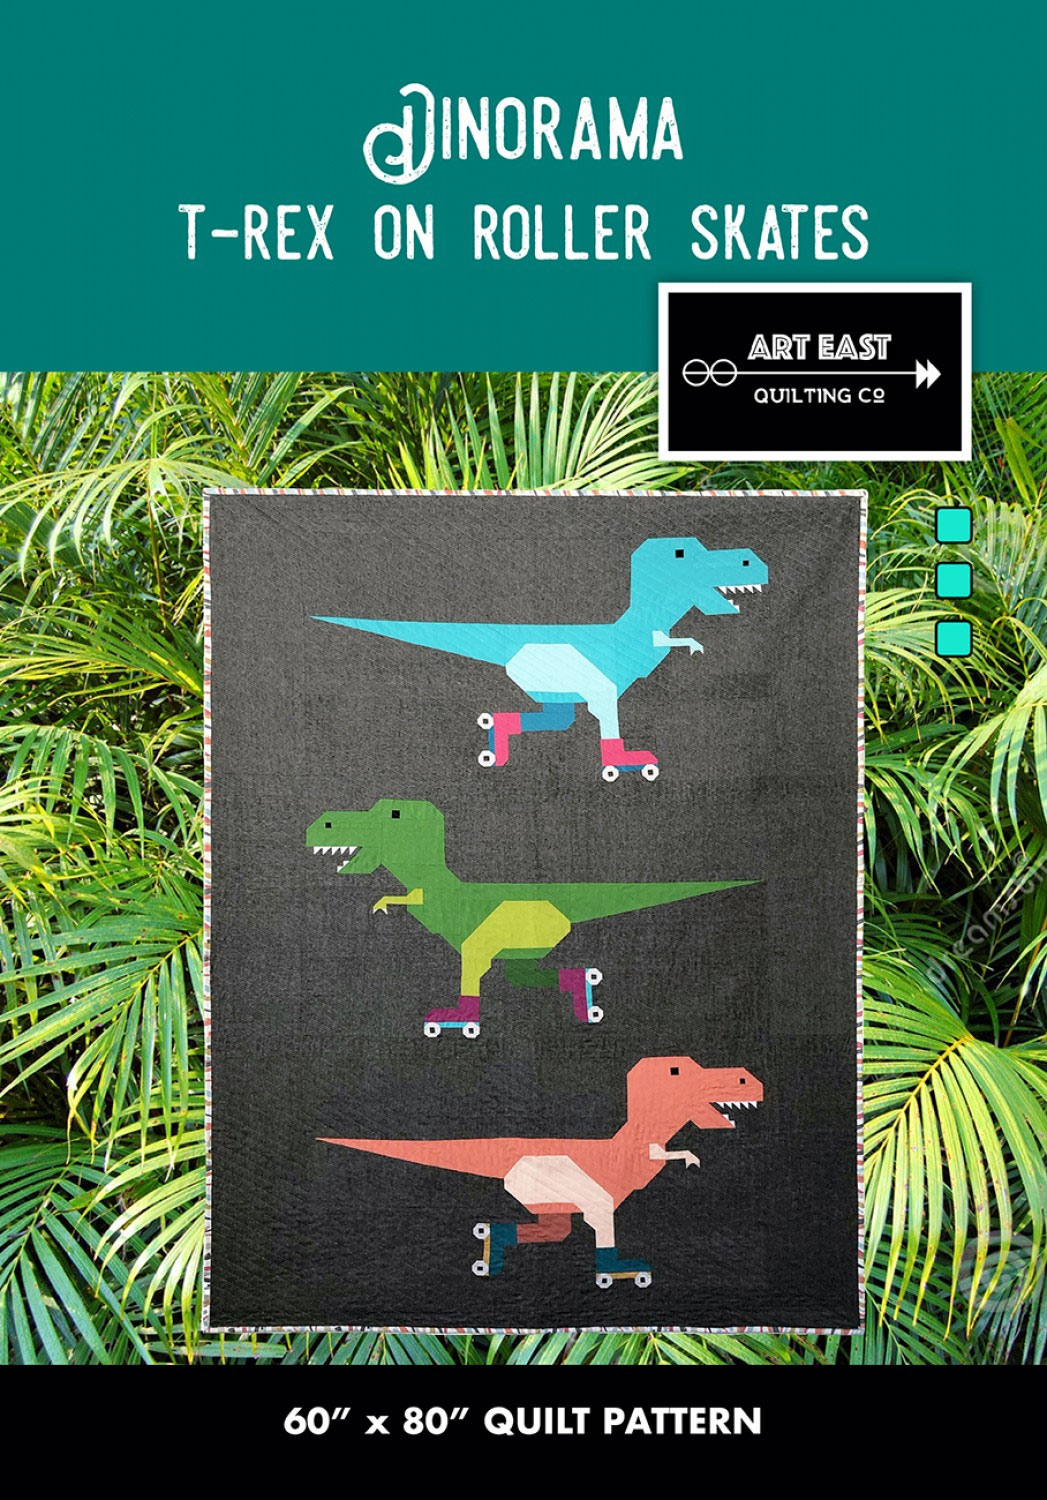 T-Rex-on-Roller-Skates-quilt-sewing-pattern-Art-East-Quilting-Co-front